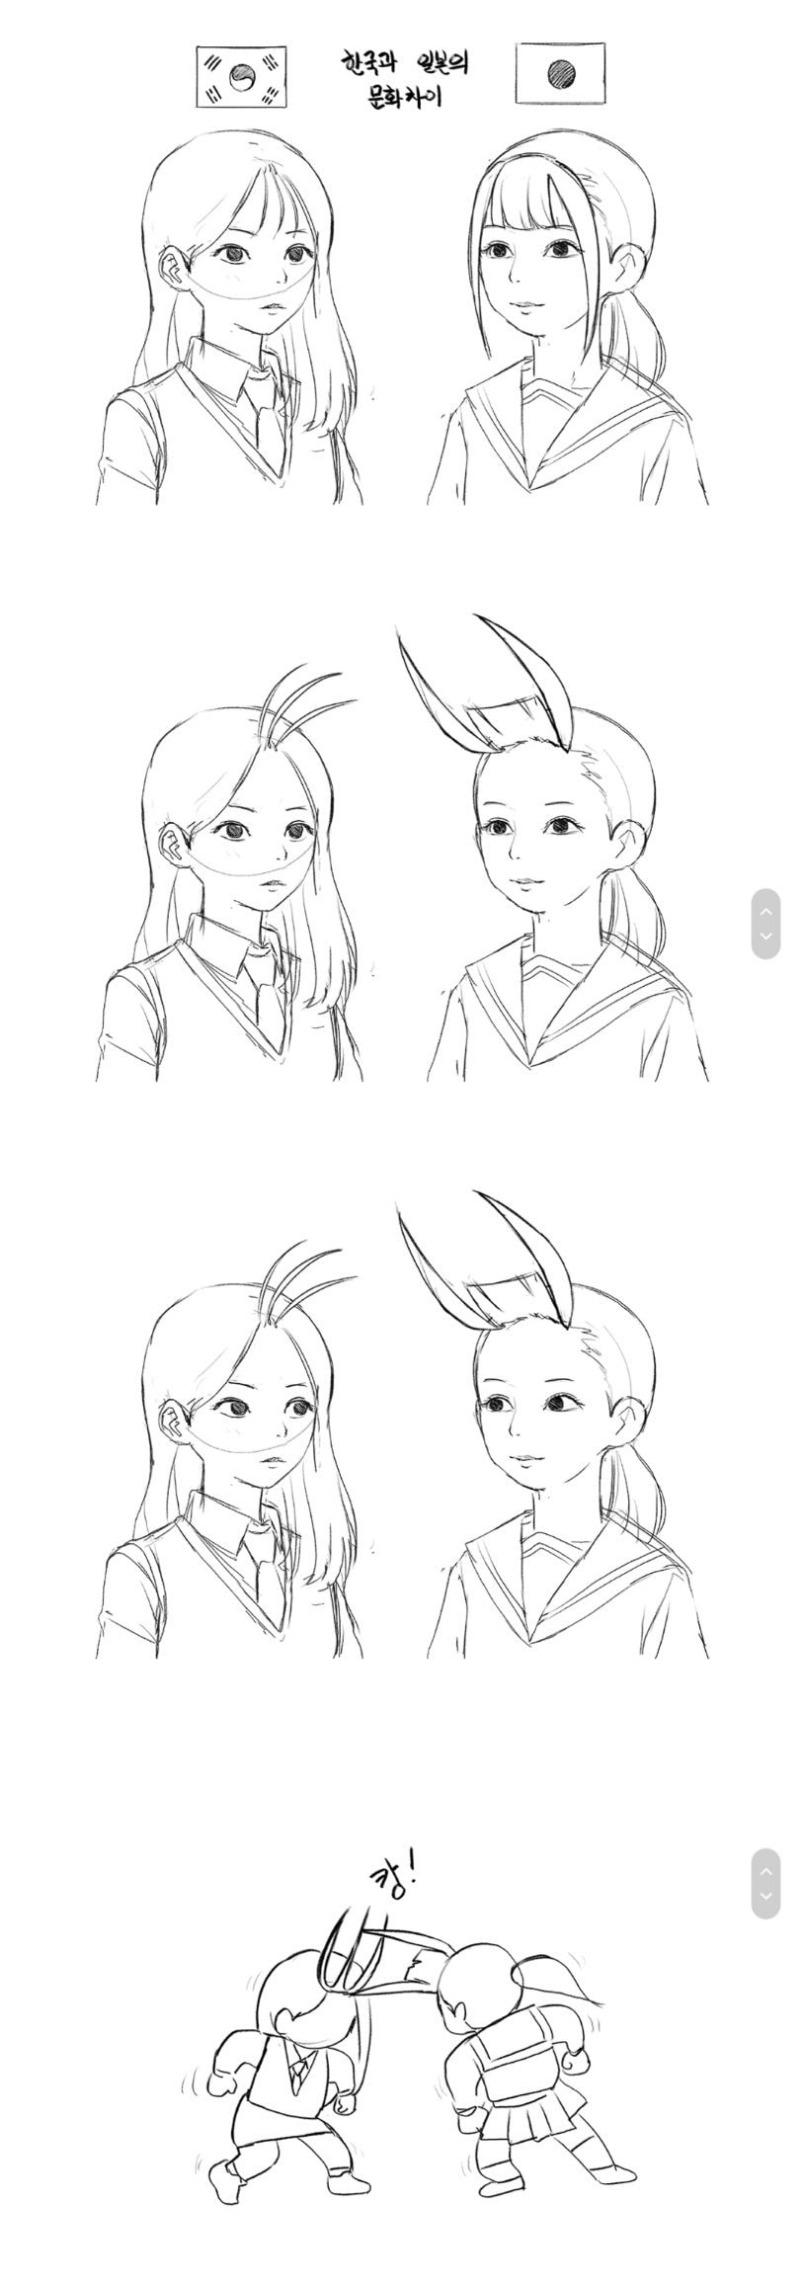 The difference between Korean and Japanese high school girls' hairstyles